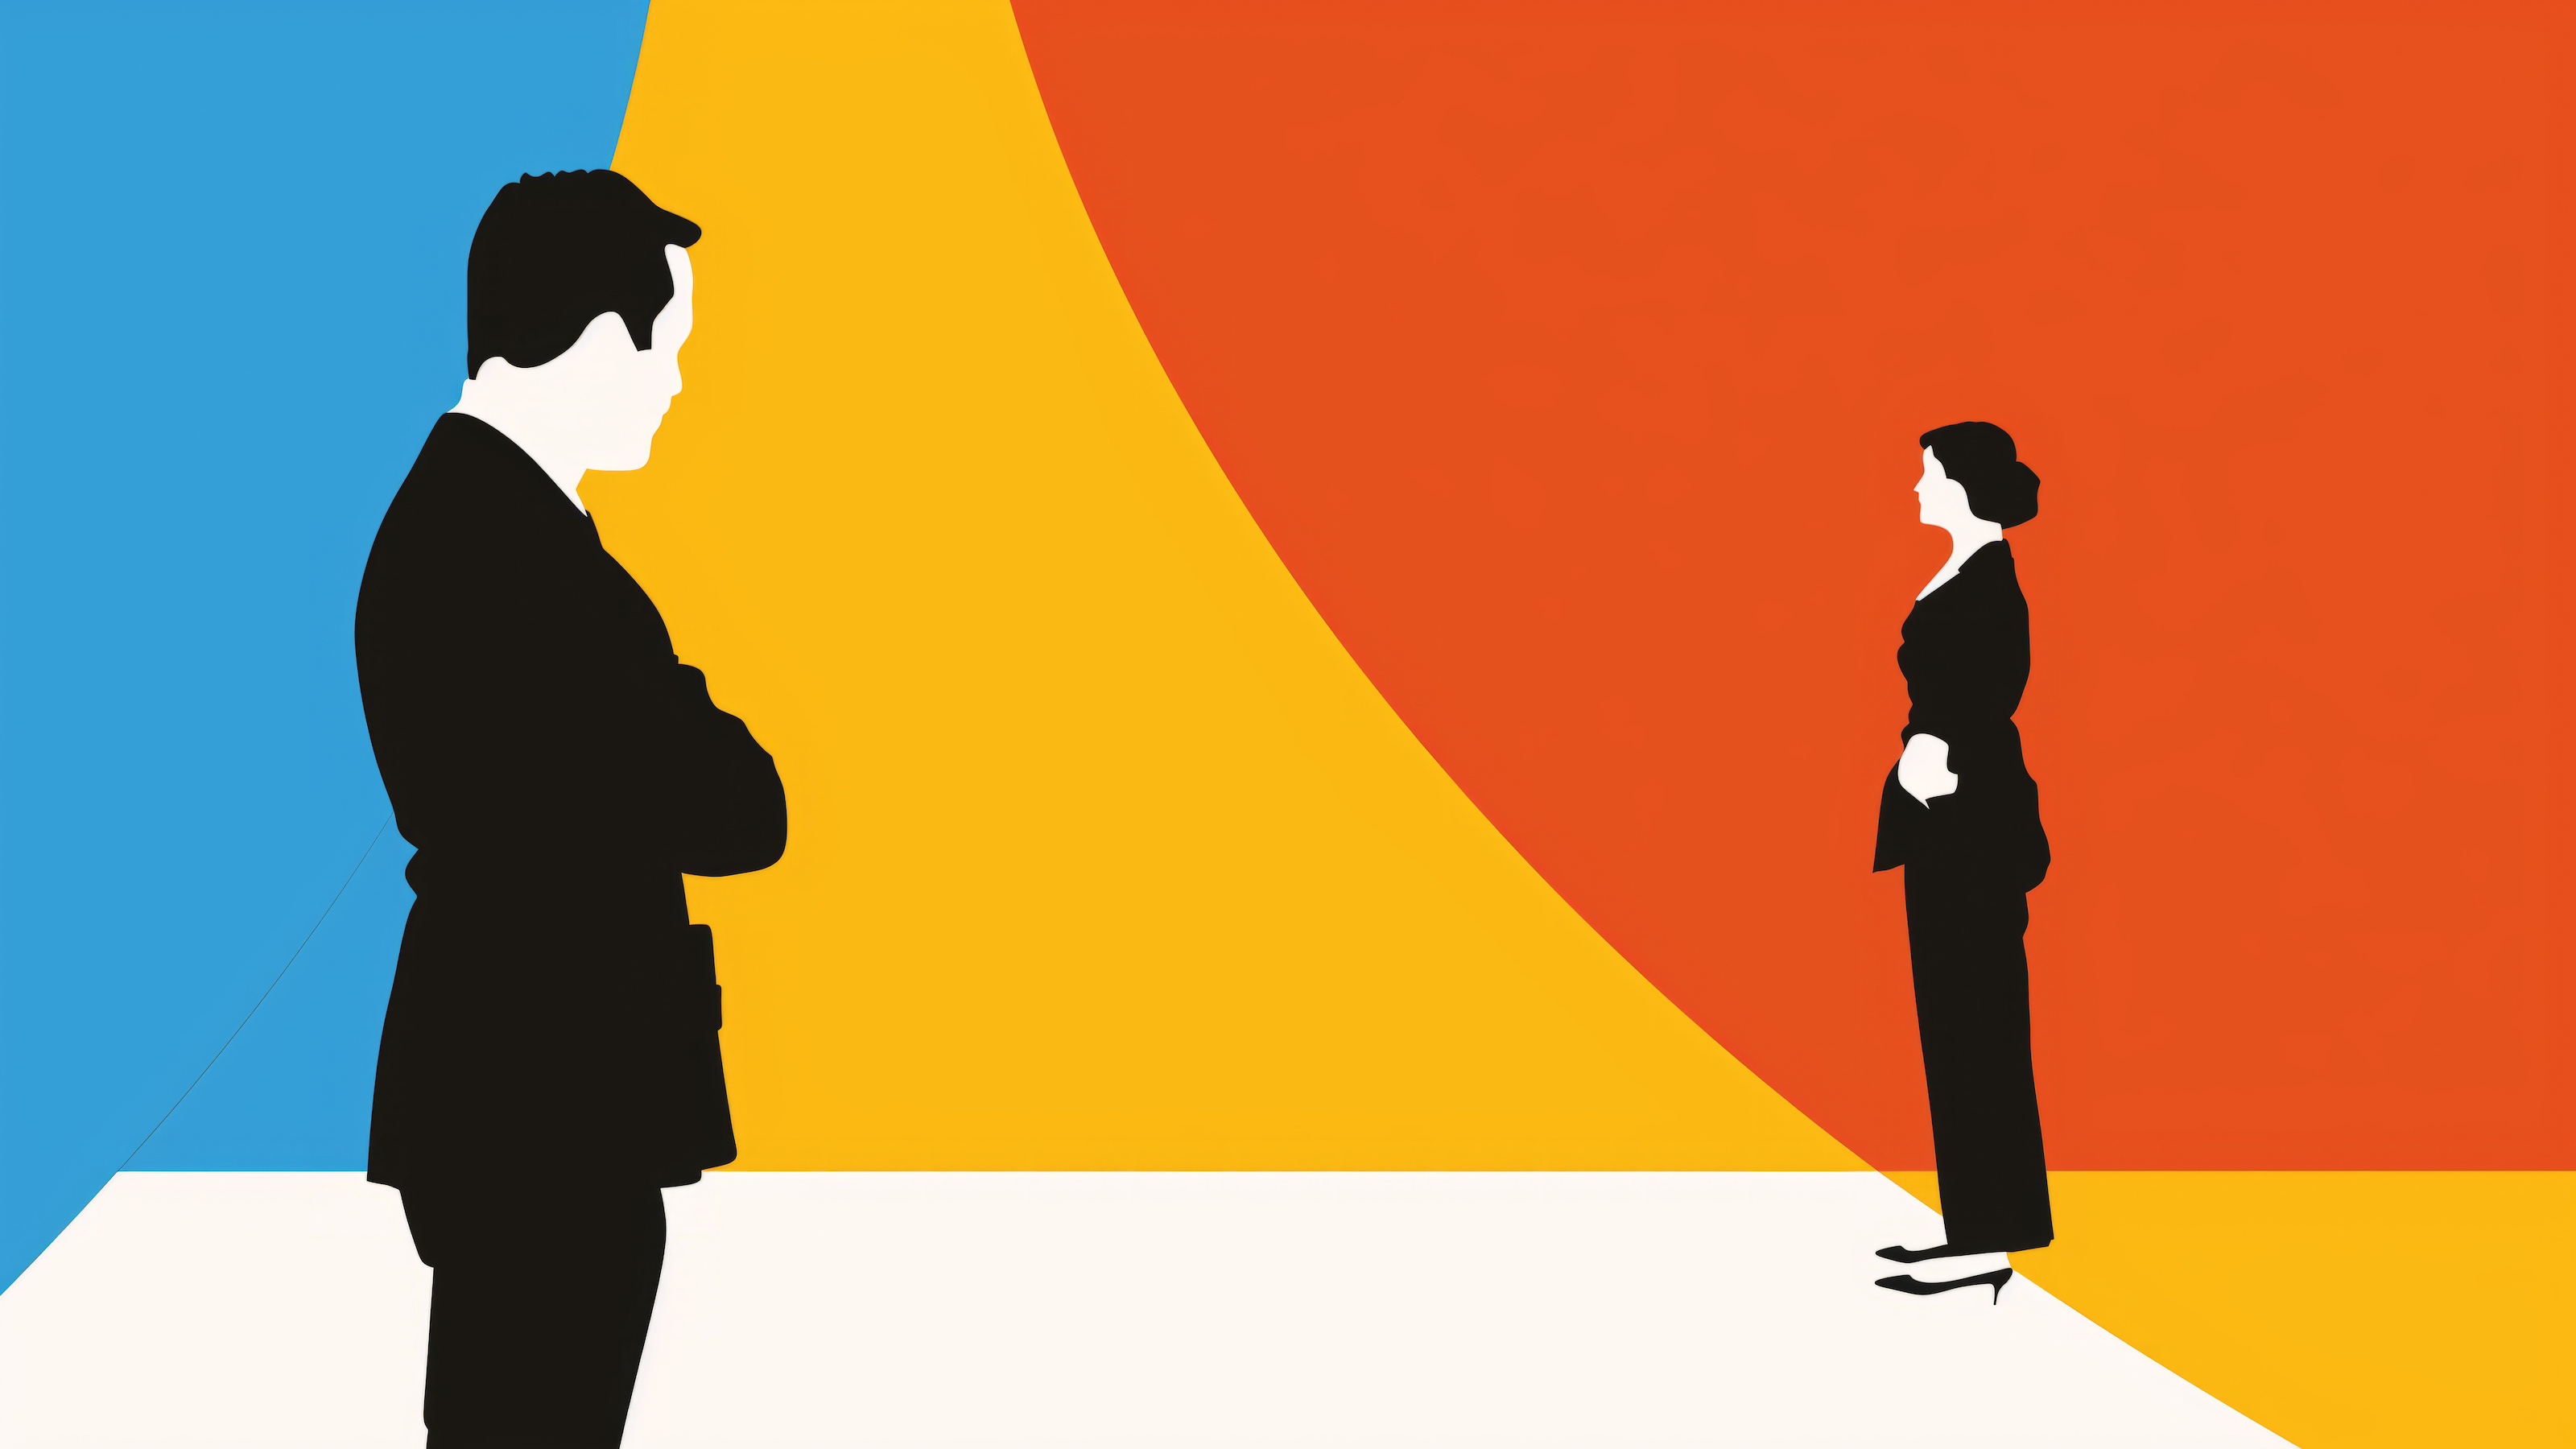 Silhouettes of a man and a woman in business attire stand facing each other with a colorful abstract background featuring blue, yellow, and red sections.